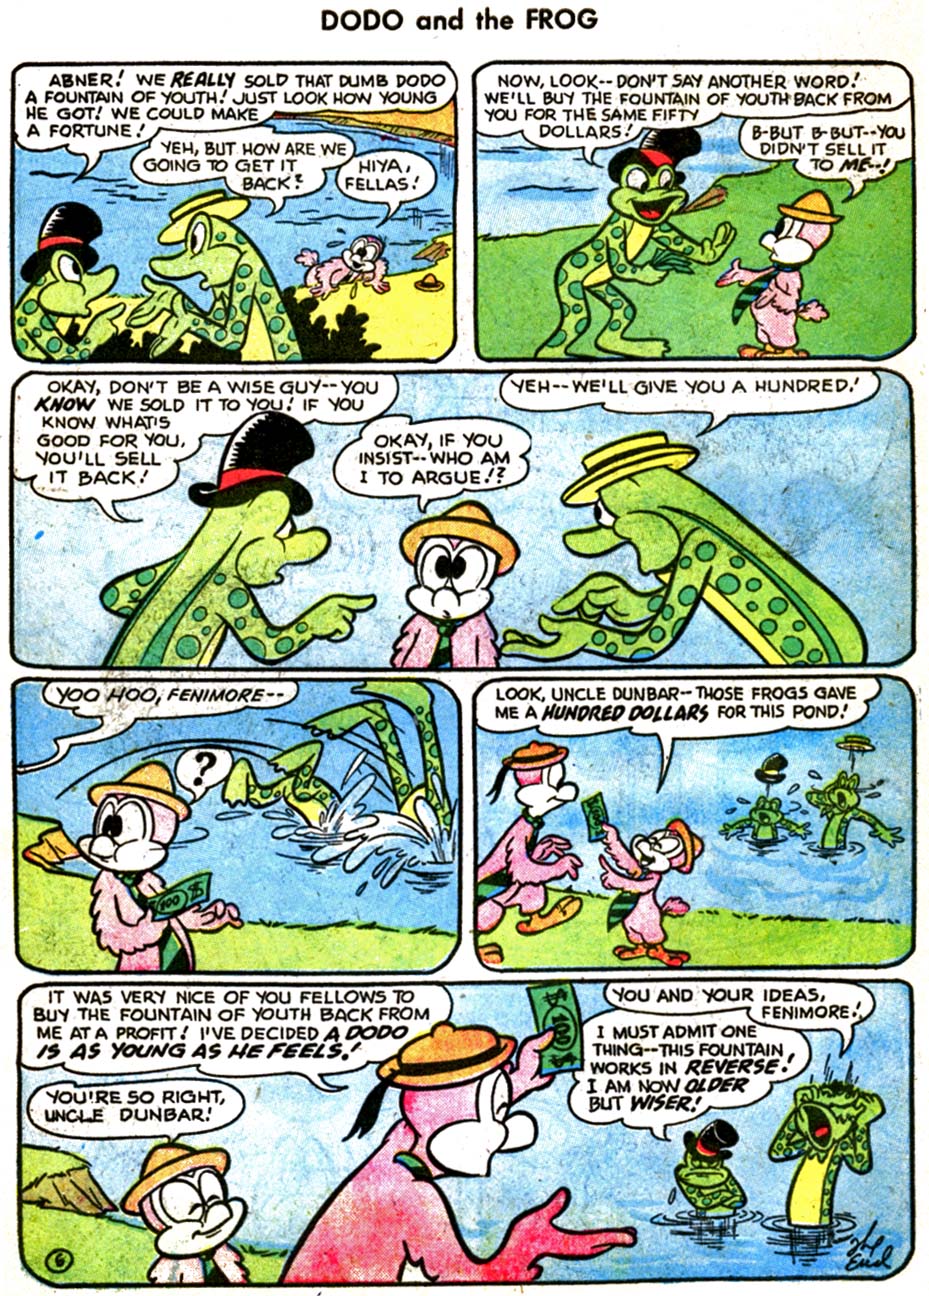 Read online Dodo and The Frog comic -  Issue #91 - 34